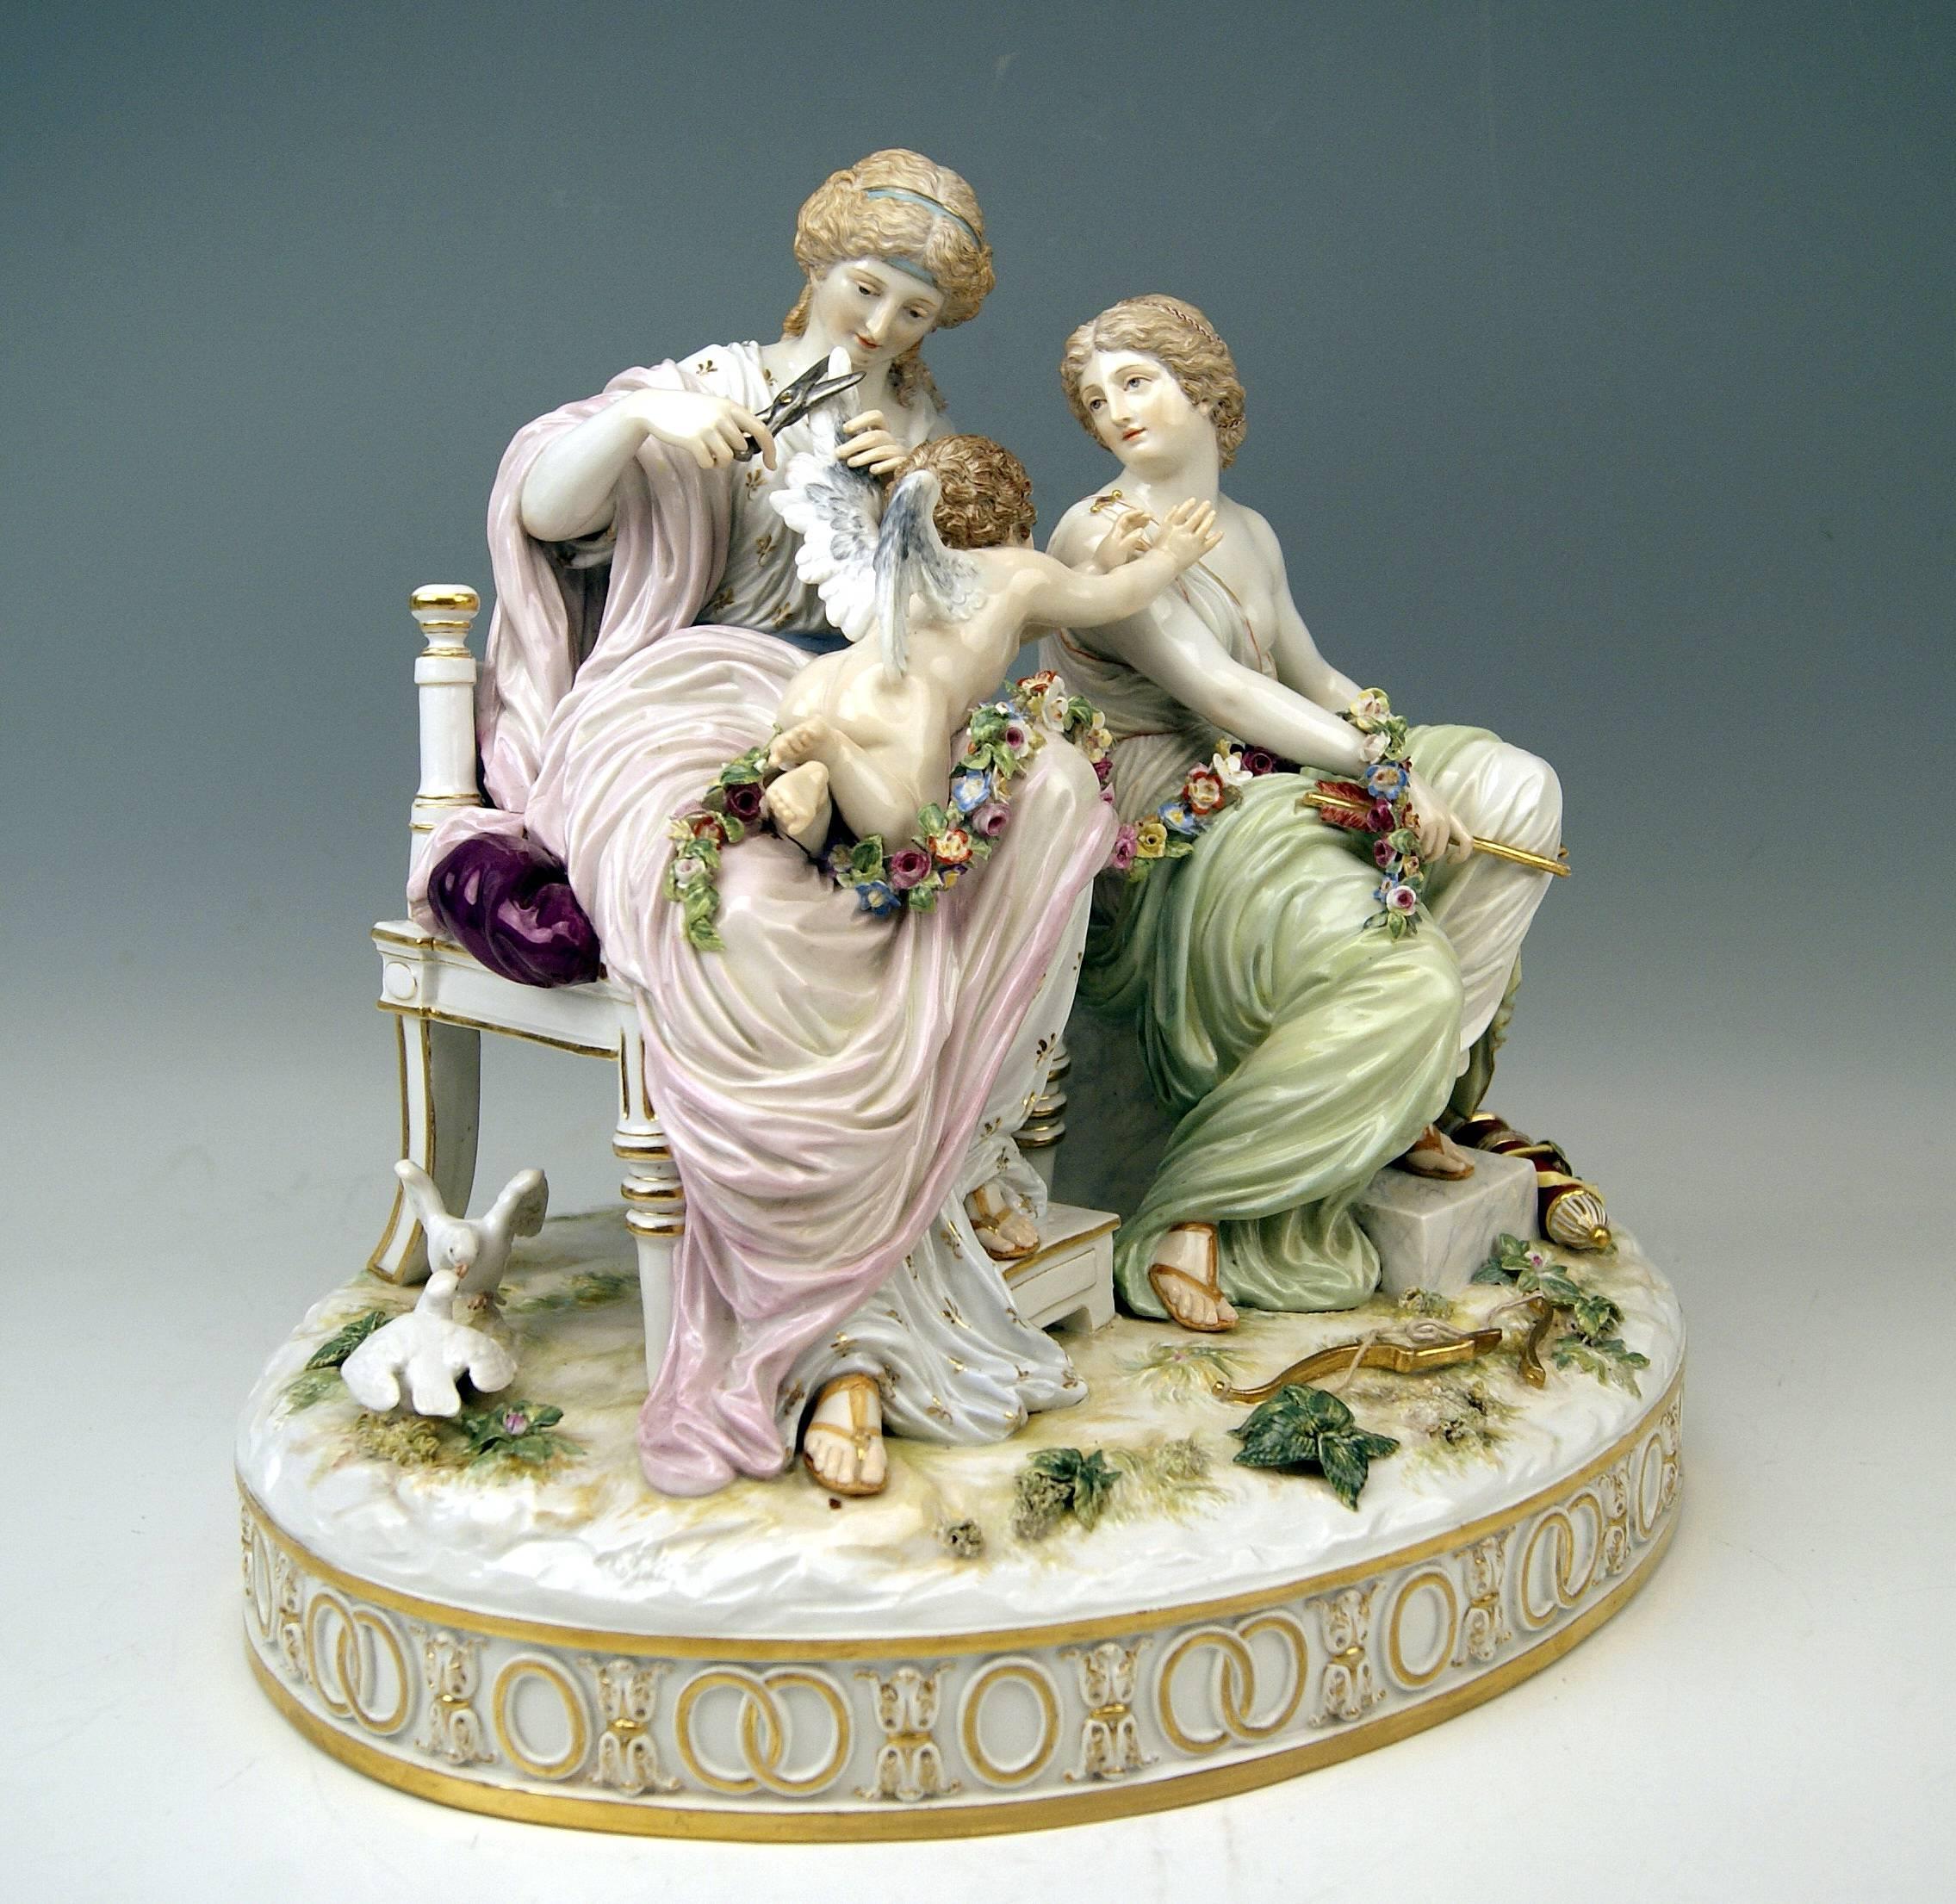 Meissen gorgeous rare and tall figurine group:
Cupid being in dire straits.
 
Manufactory: Meissen.
Hallmarked: Blue Meissen Sword Mark (underglazed).
First quality.
Dating: Made circa 1870.
Material: Porcelain, glossy finish, multicolored